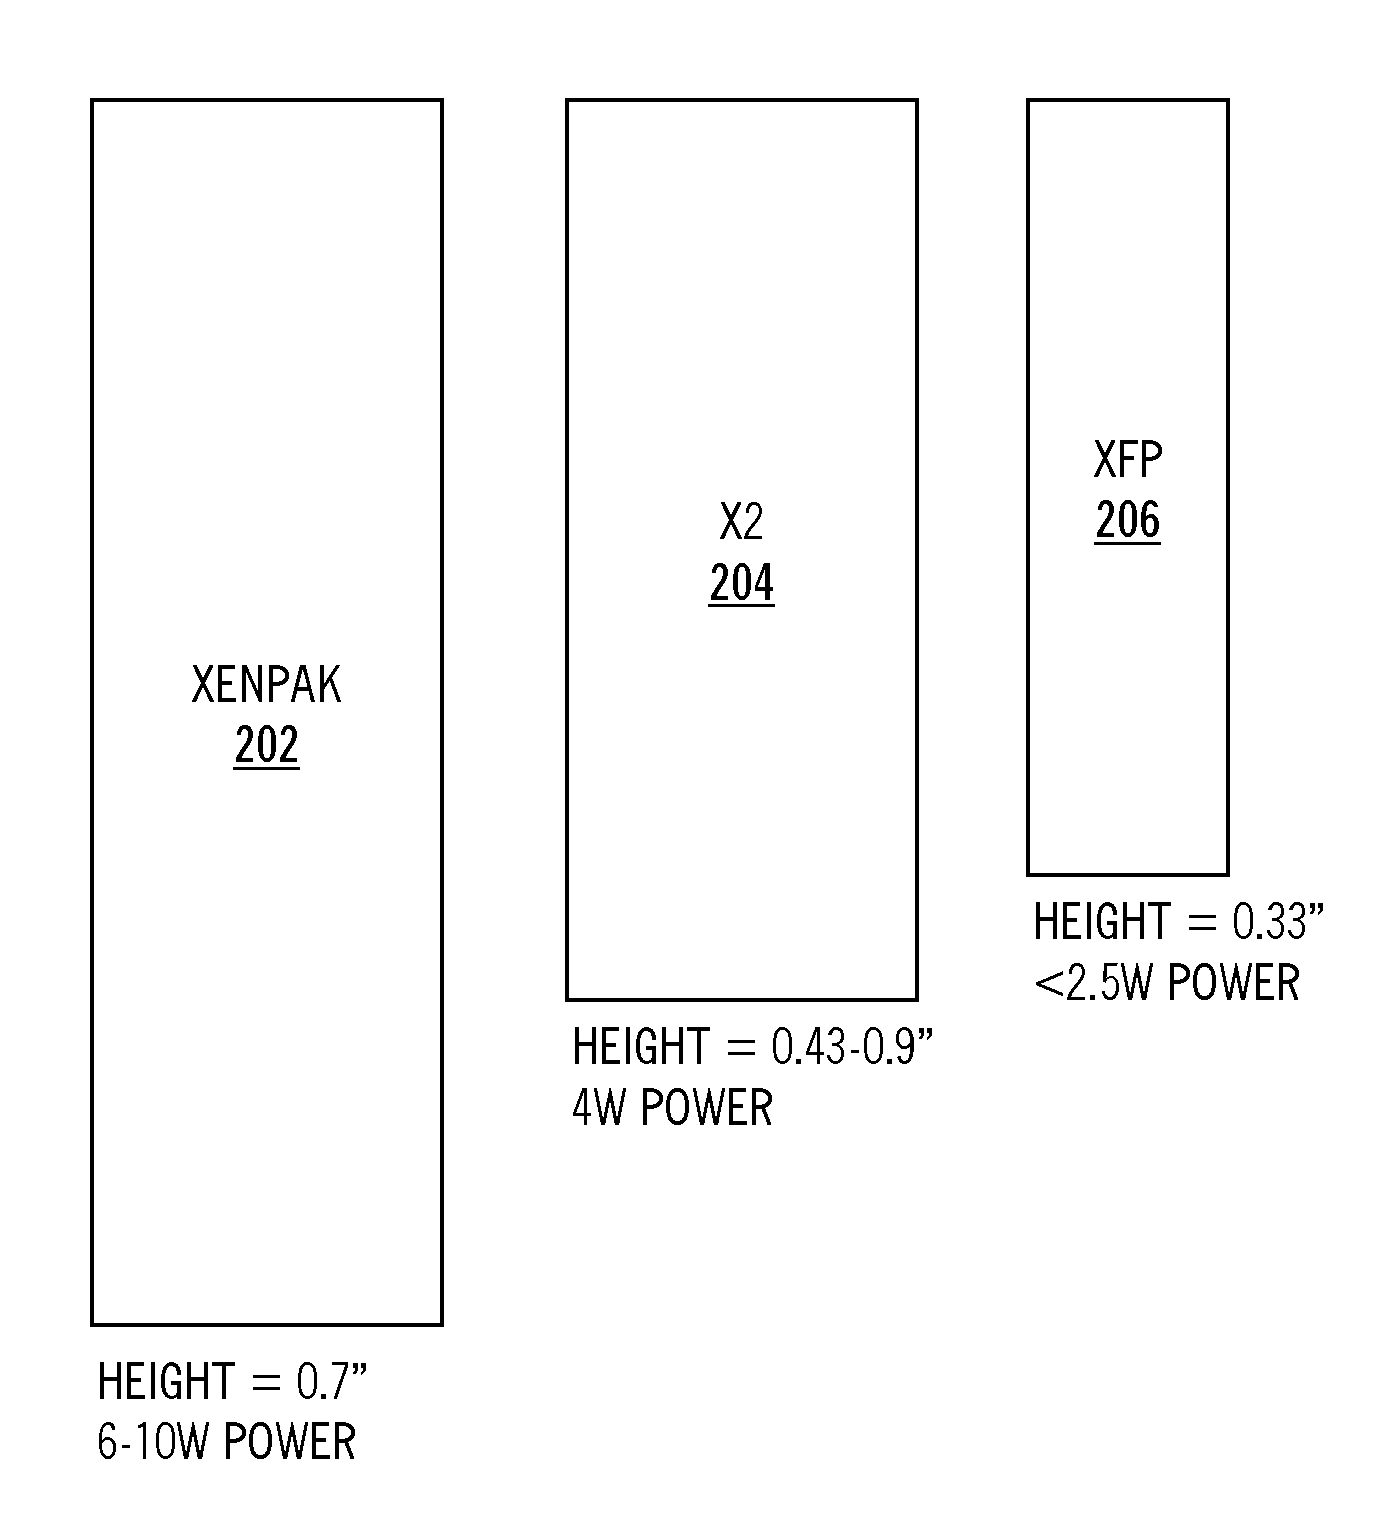 Optical transceiver performance monitoring and alarming systems and methods